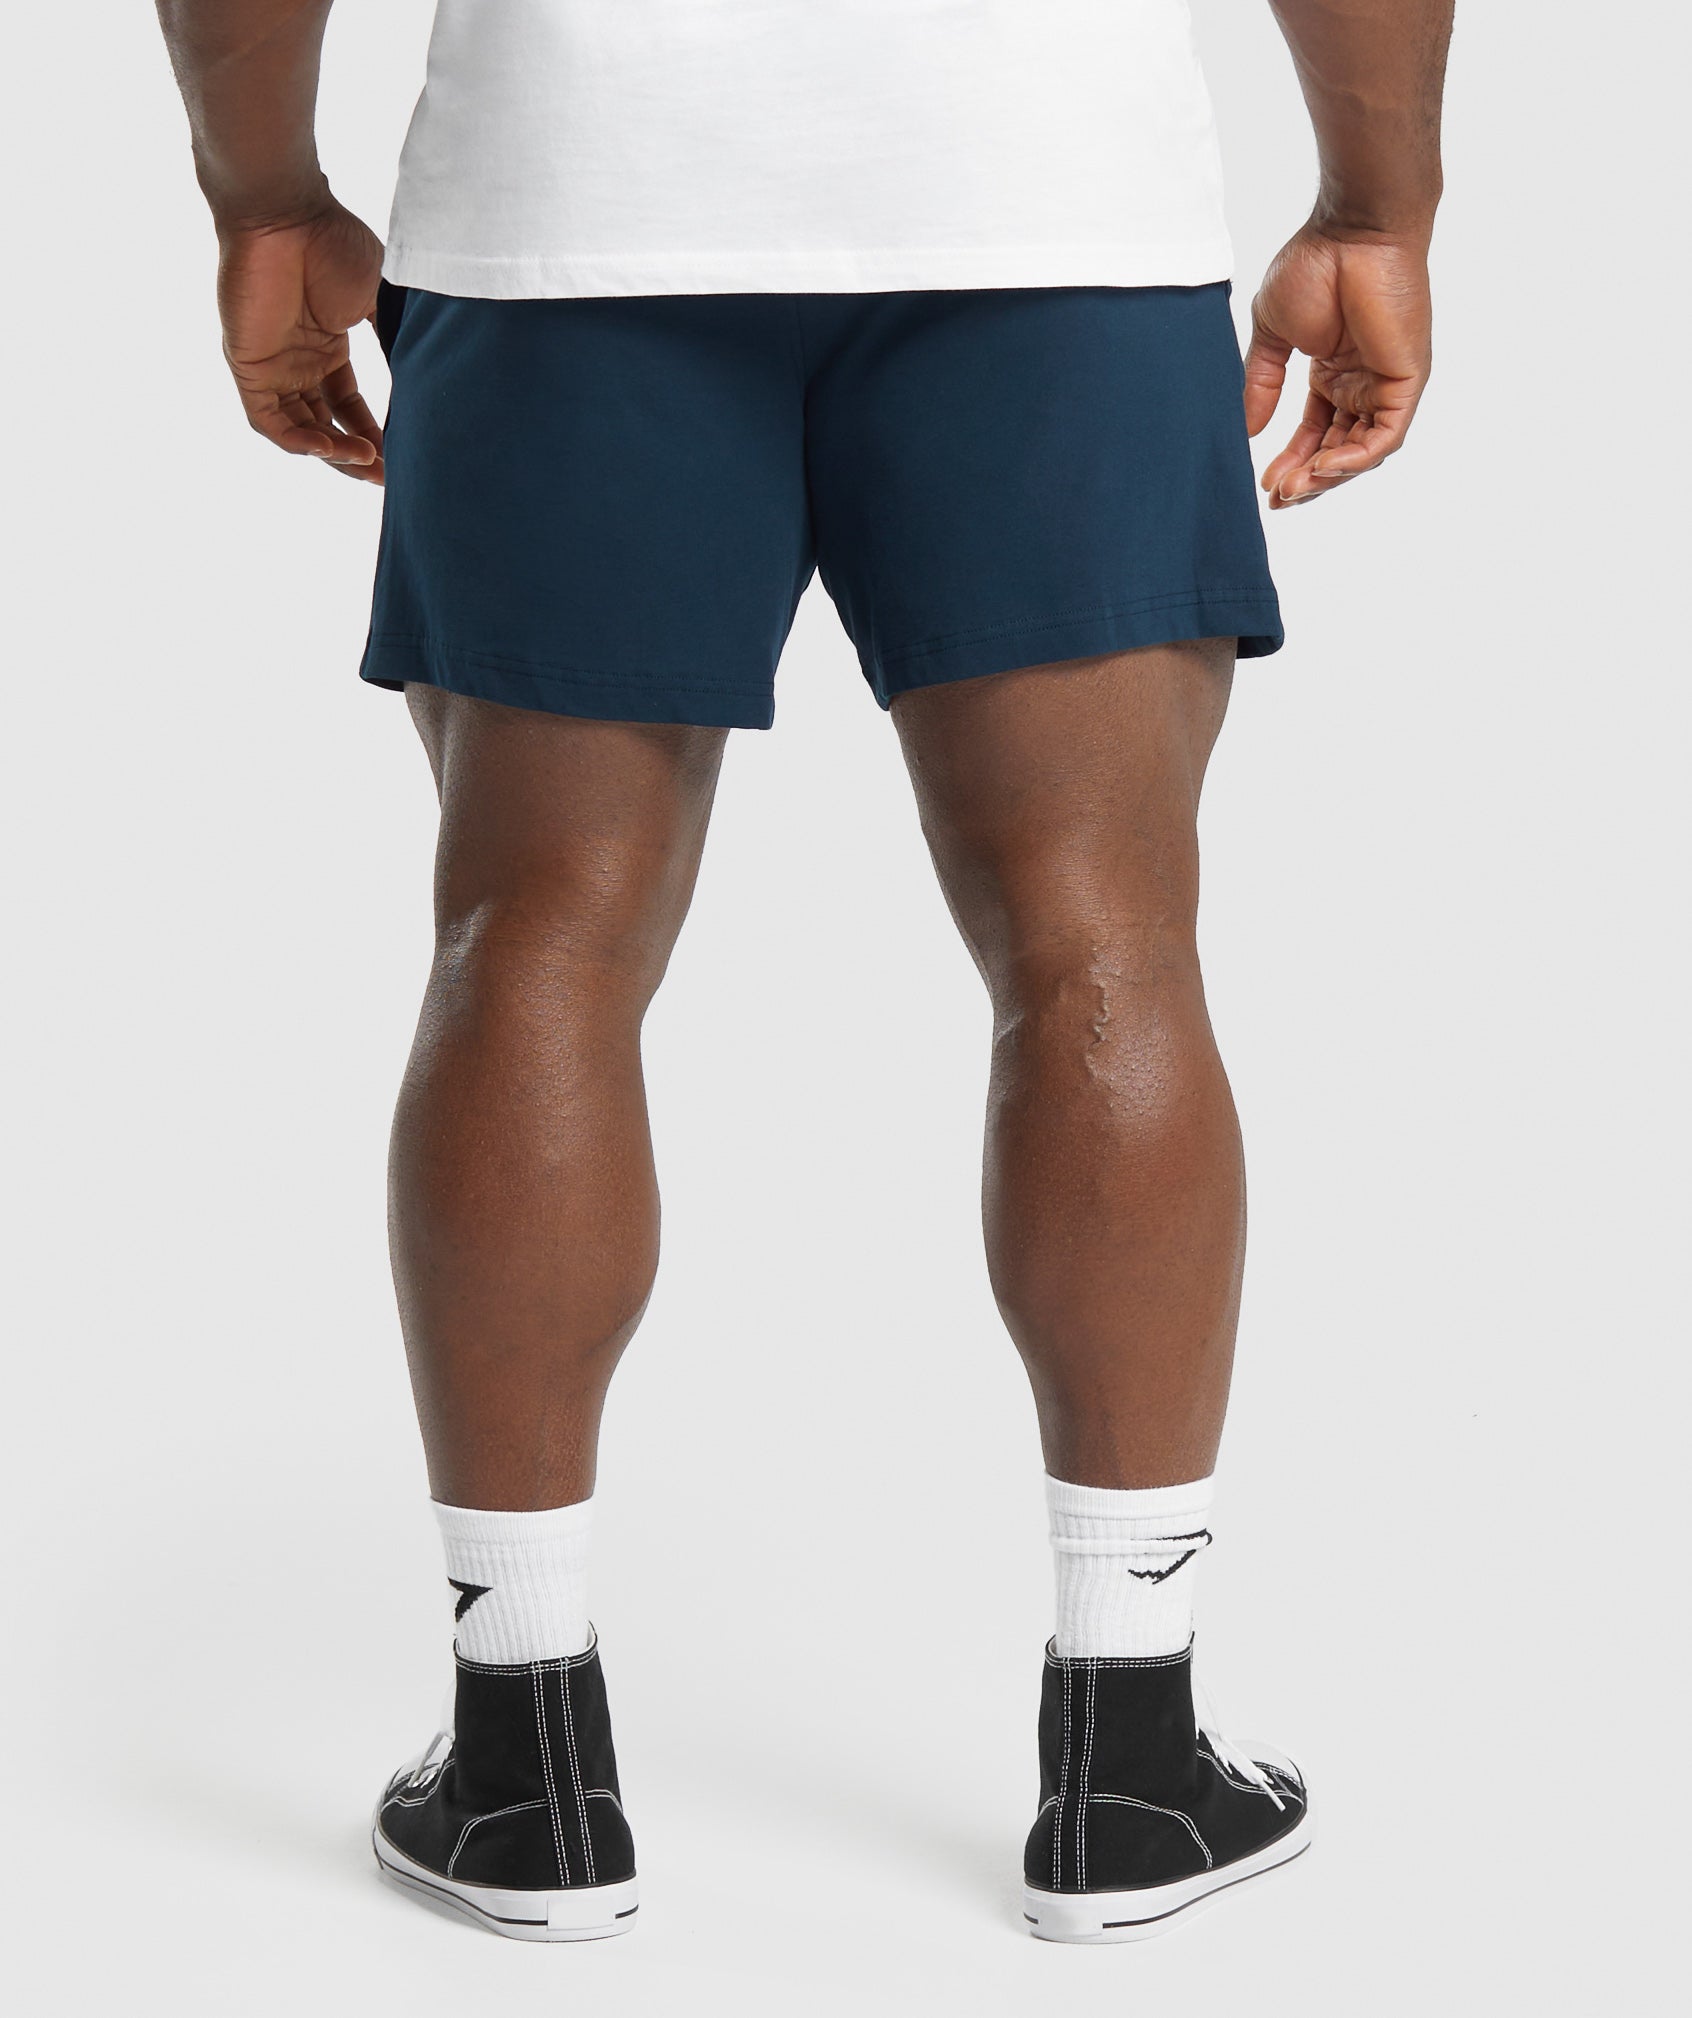 Vital Element 7 Inch Workout Shorts